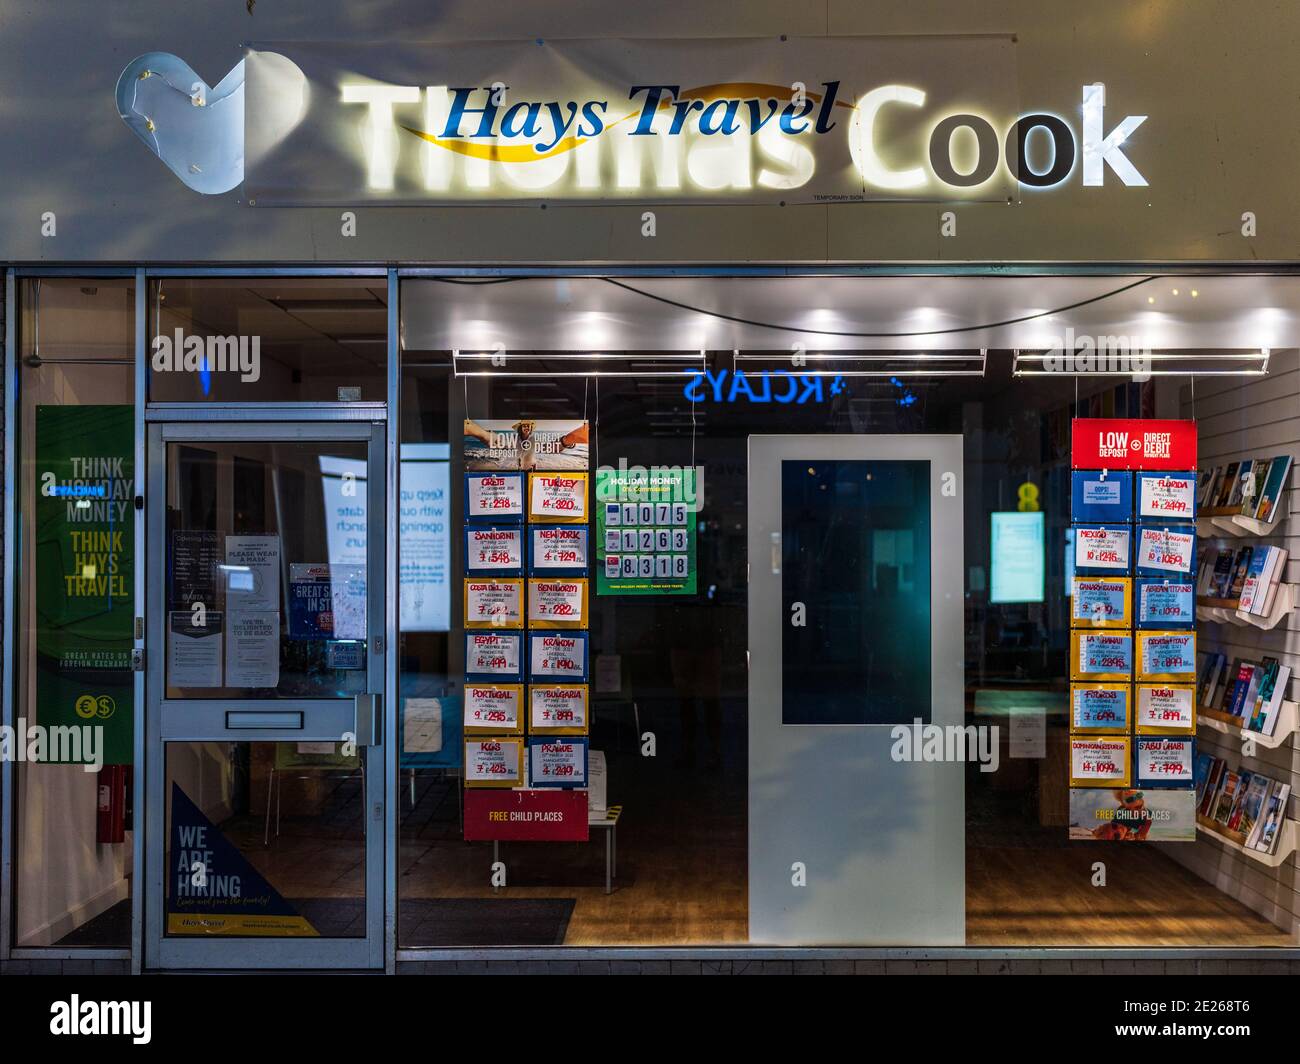 Hays Travel Agency - former Thomas Cook Travel Agency taken over by Hays Travel in 2019. Temporary Hays Travel Signage over the Thomas Cook Sign. Stock Photo